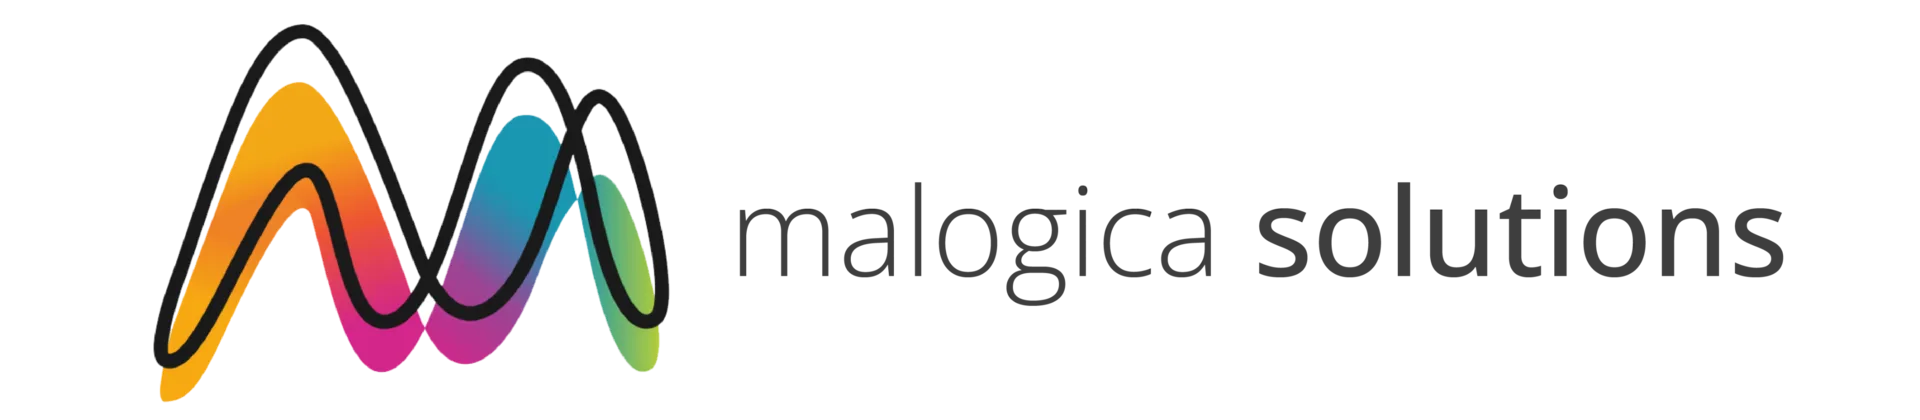 Malogica Solutions